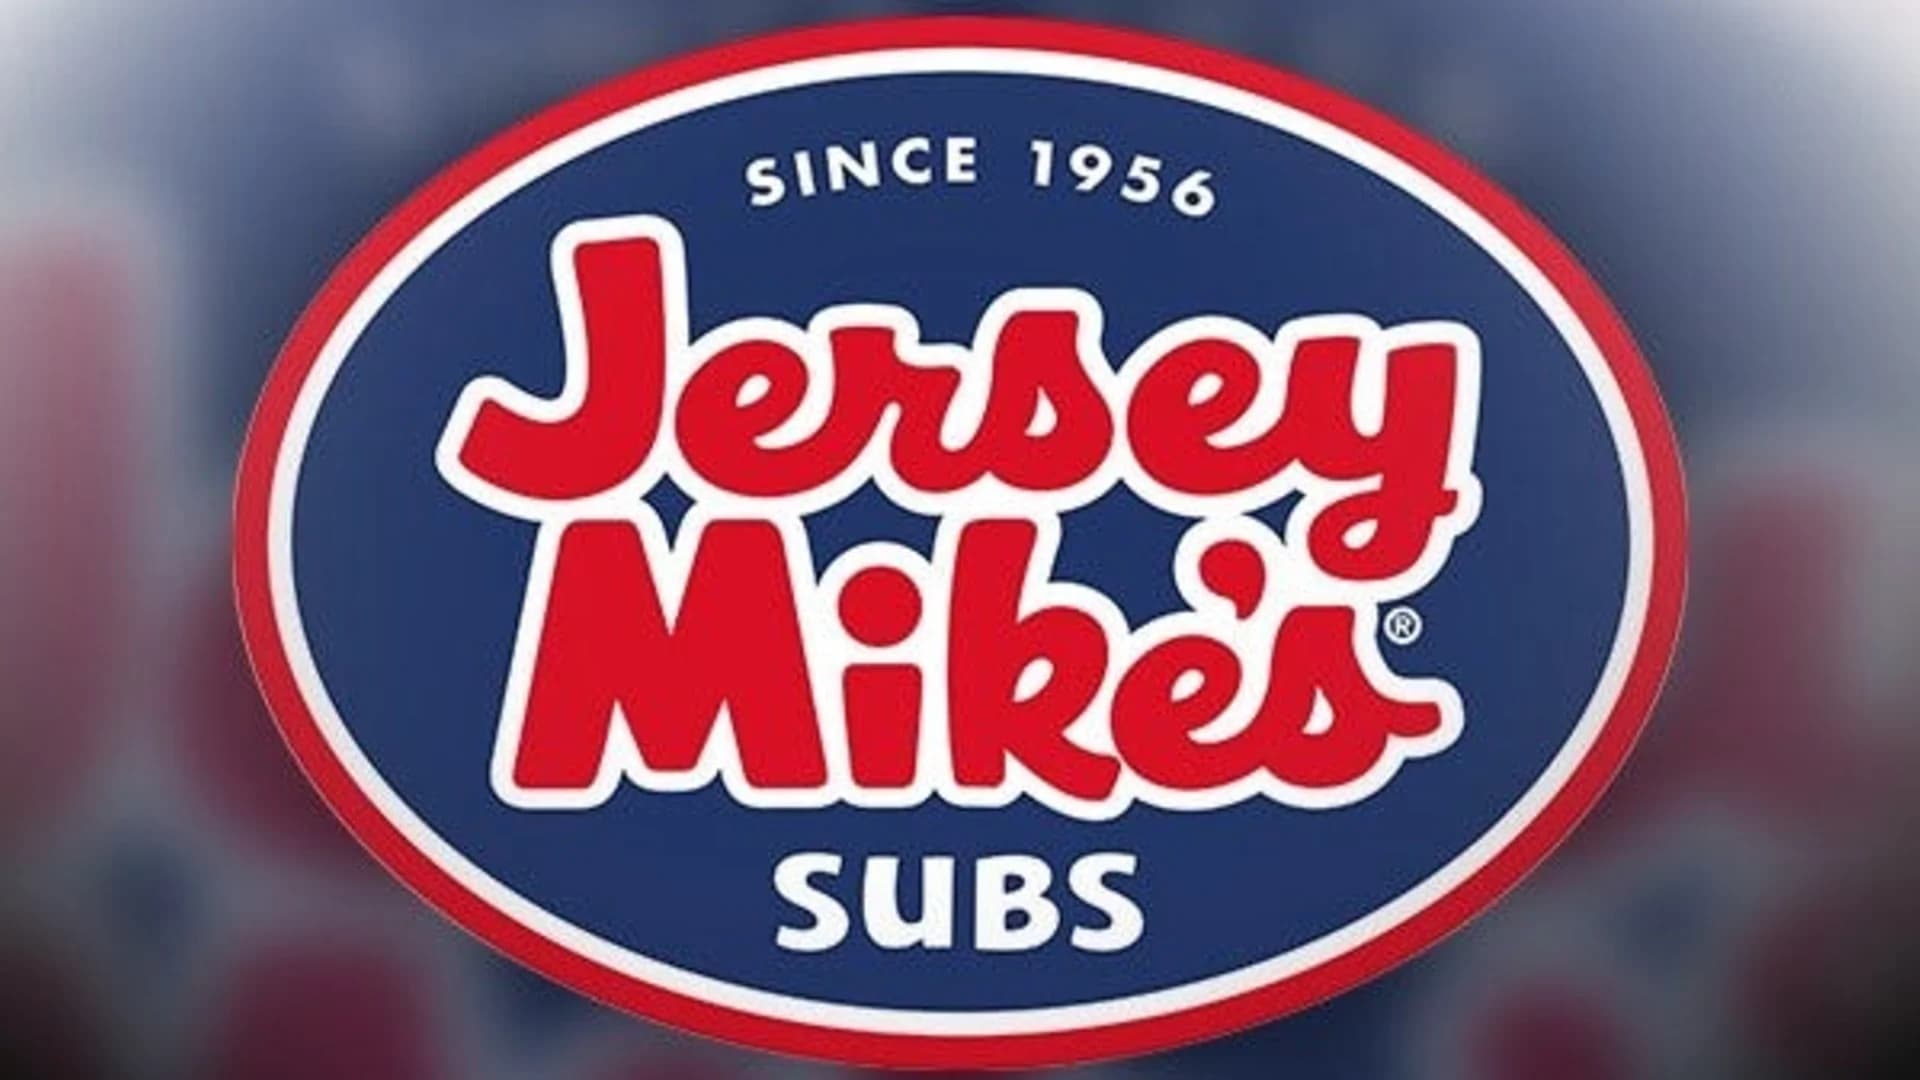 Day of Giving: Jersey Mike’s donates 100 percent of sales to local charities